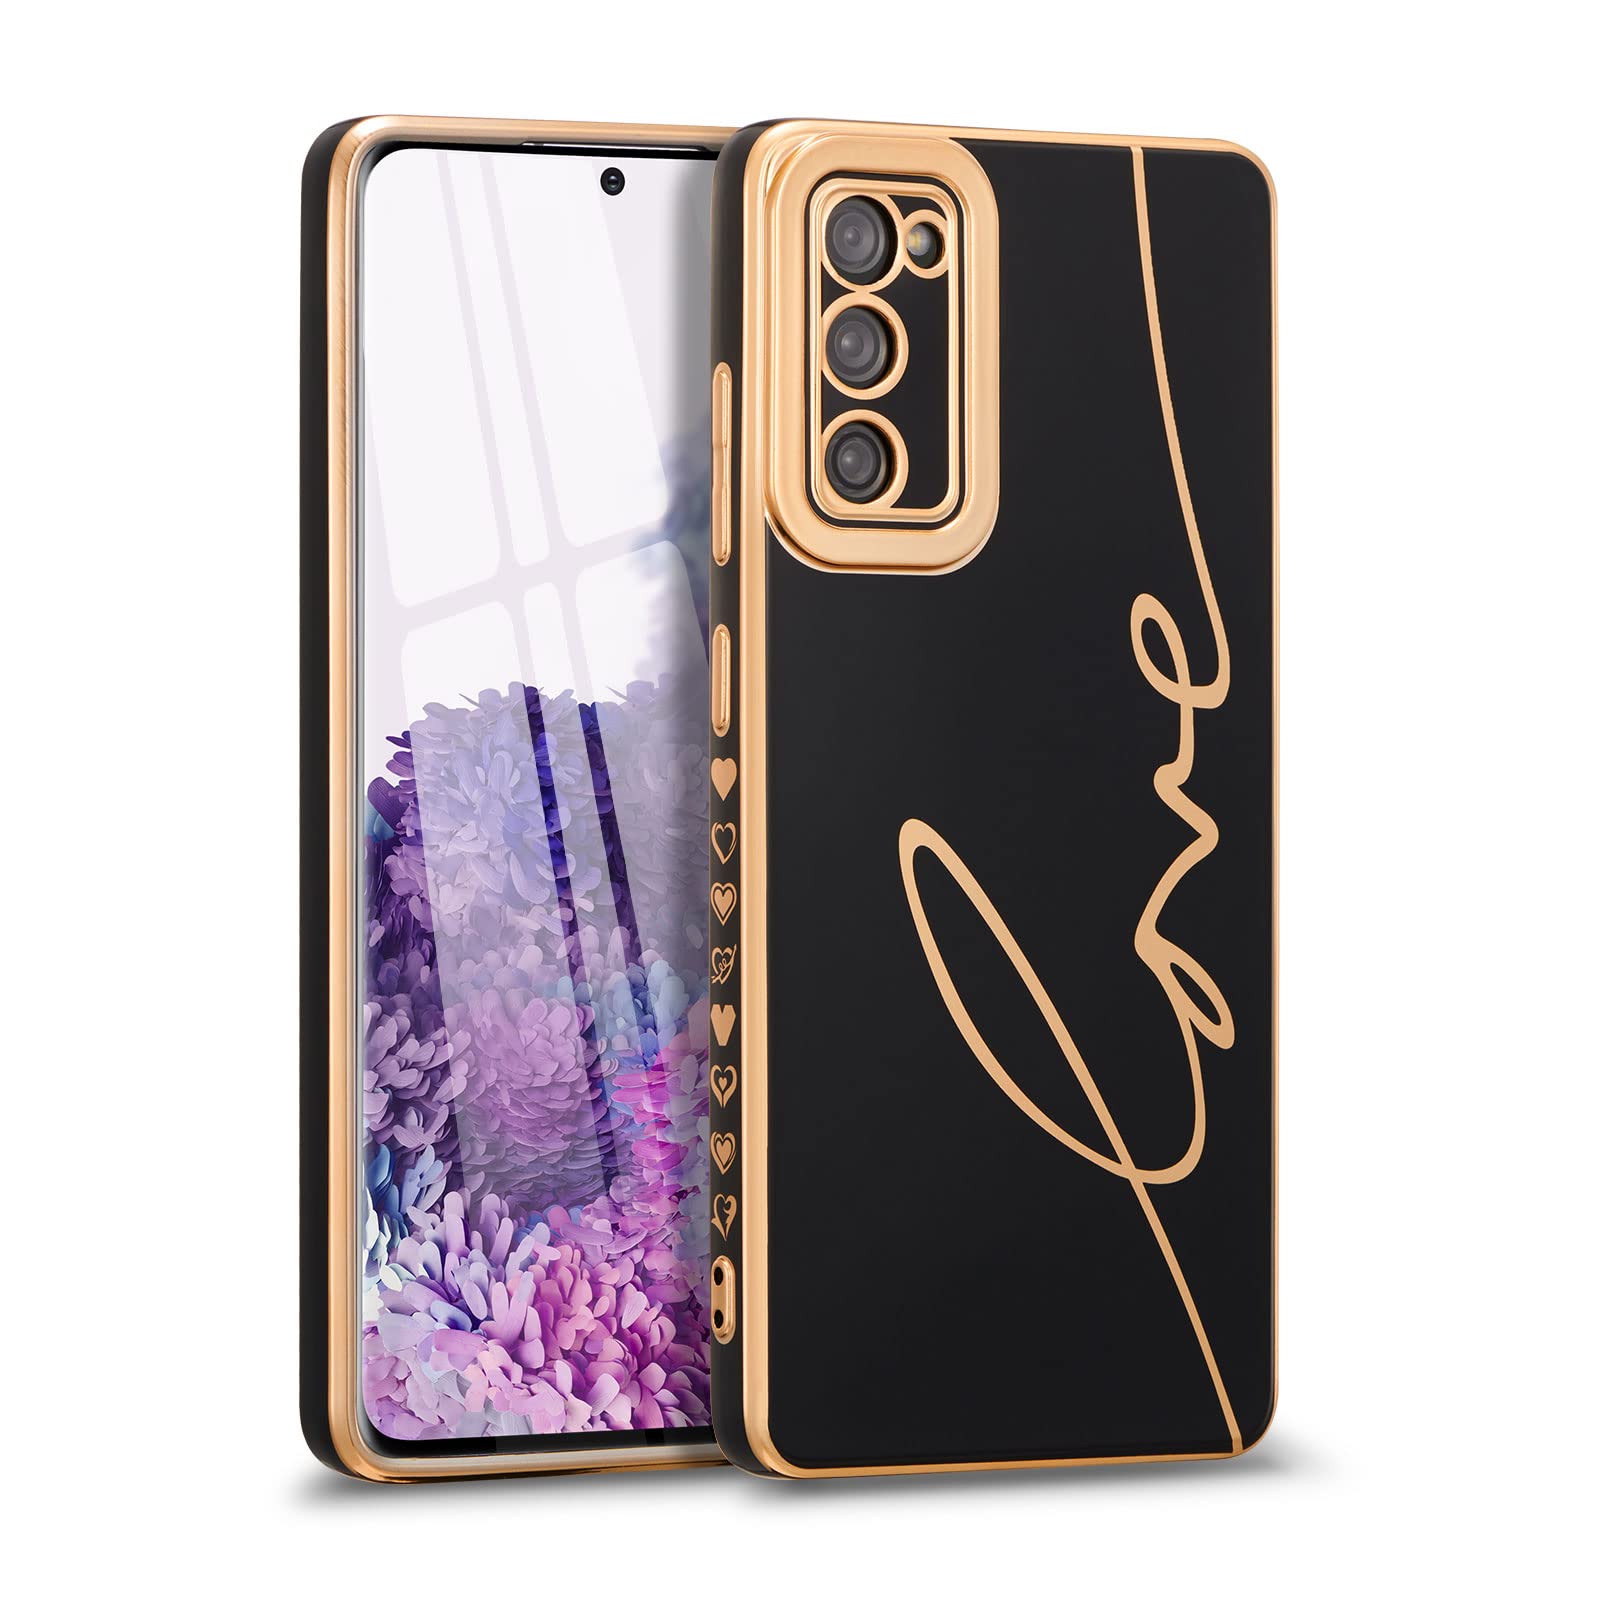 RALEAVO for Samsung Galaxy S20 FE 5G Case Luxury Plating Case Cover,Cute Love Heart Phone Case,Slim Soft TPU Shockproof Bumper Case with Full Camera Protection,Electroplated Case for Women Girls,Black